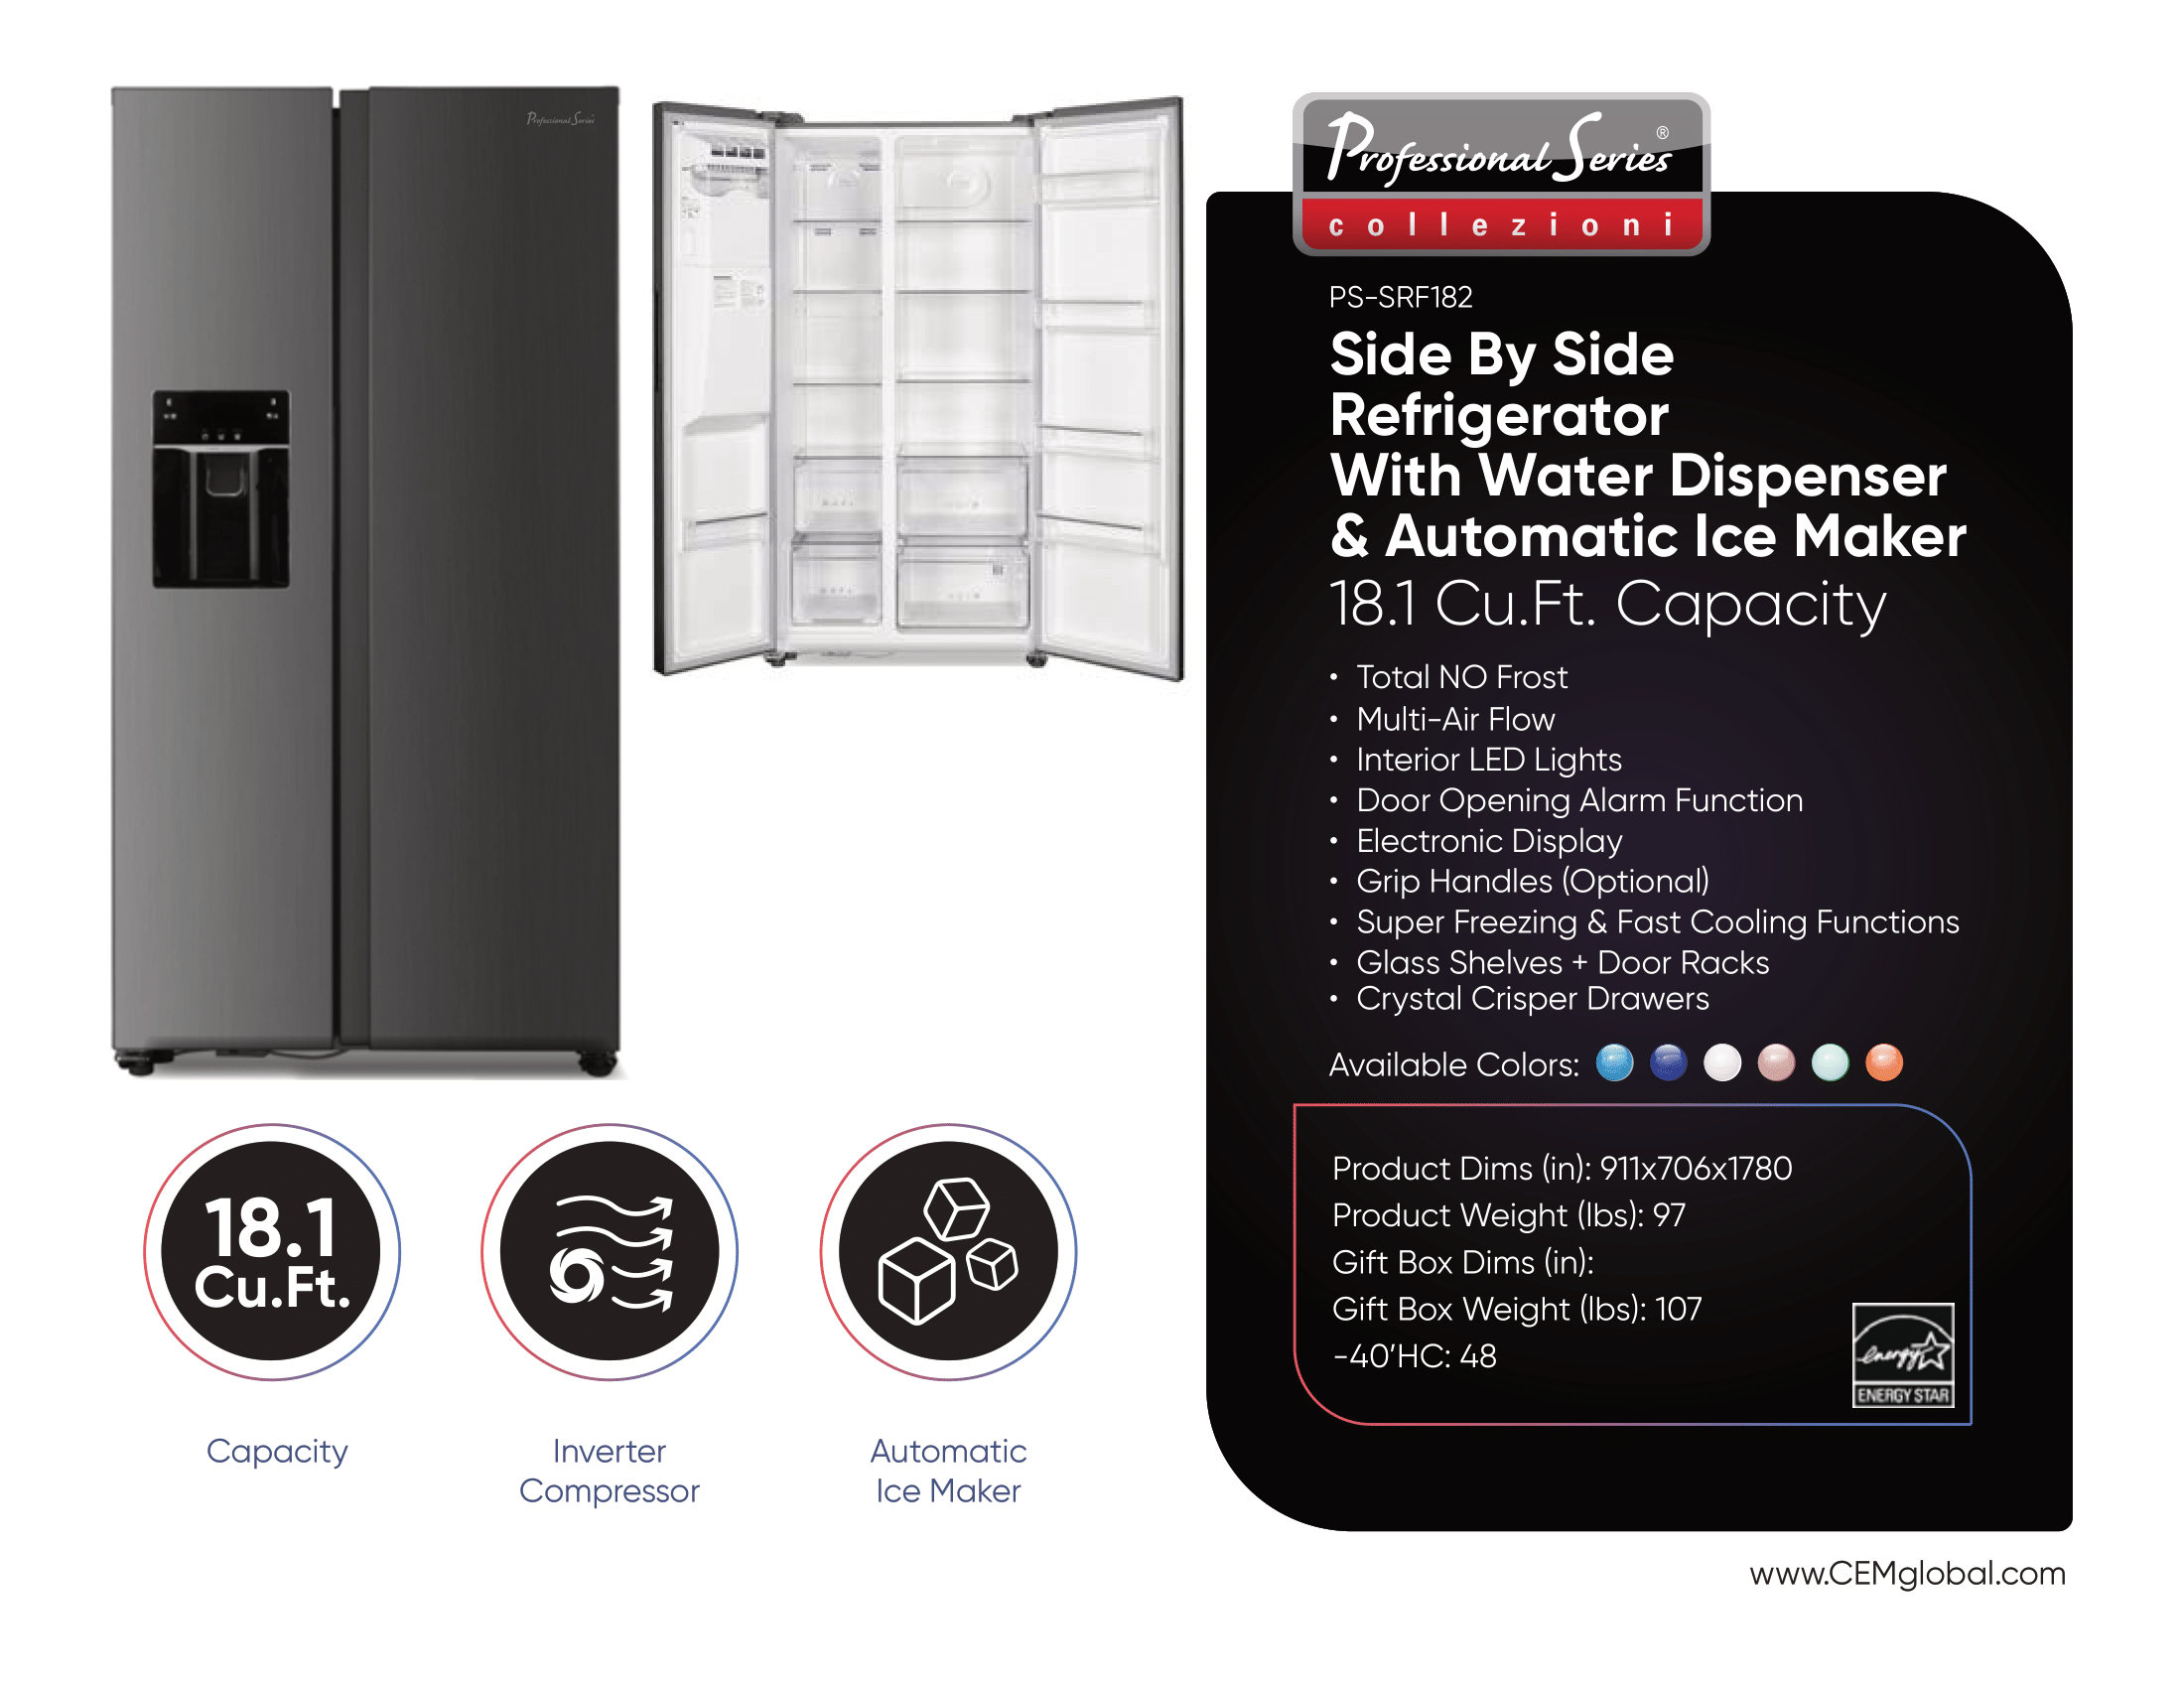 Side By Side Refrigerator With Water Dispenser & Automatic Ice Maker 18.1 Cu.Ft.